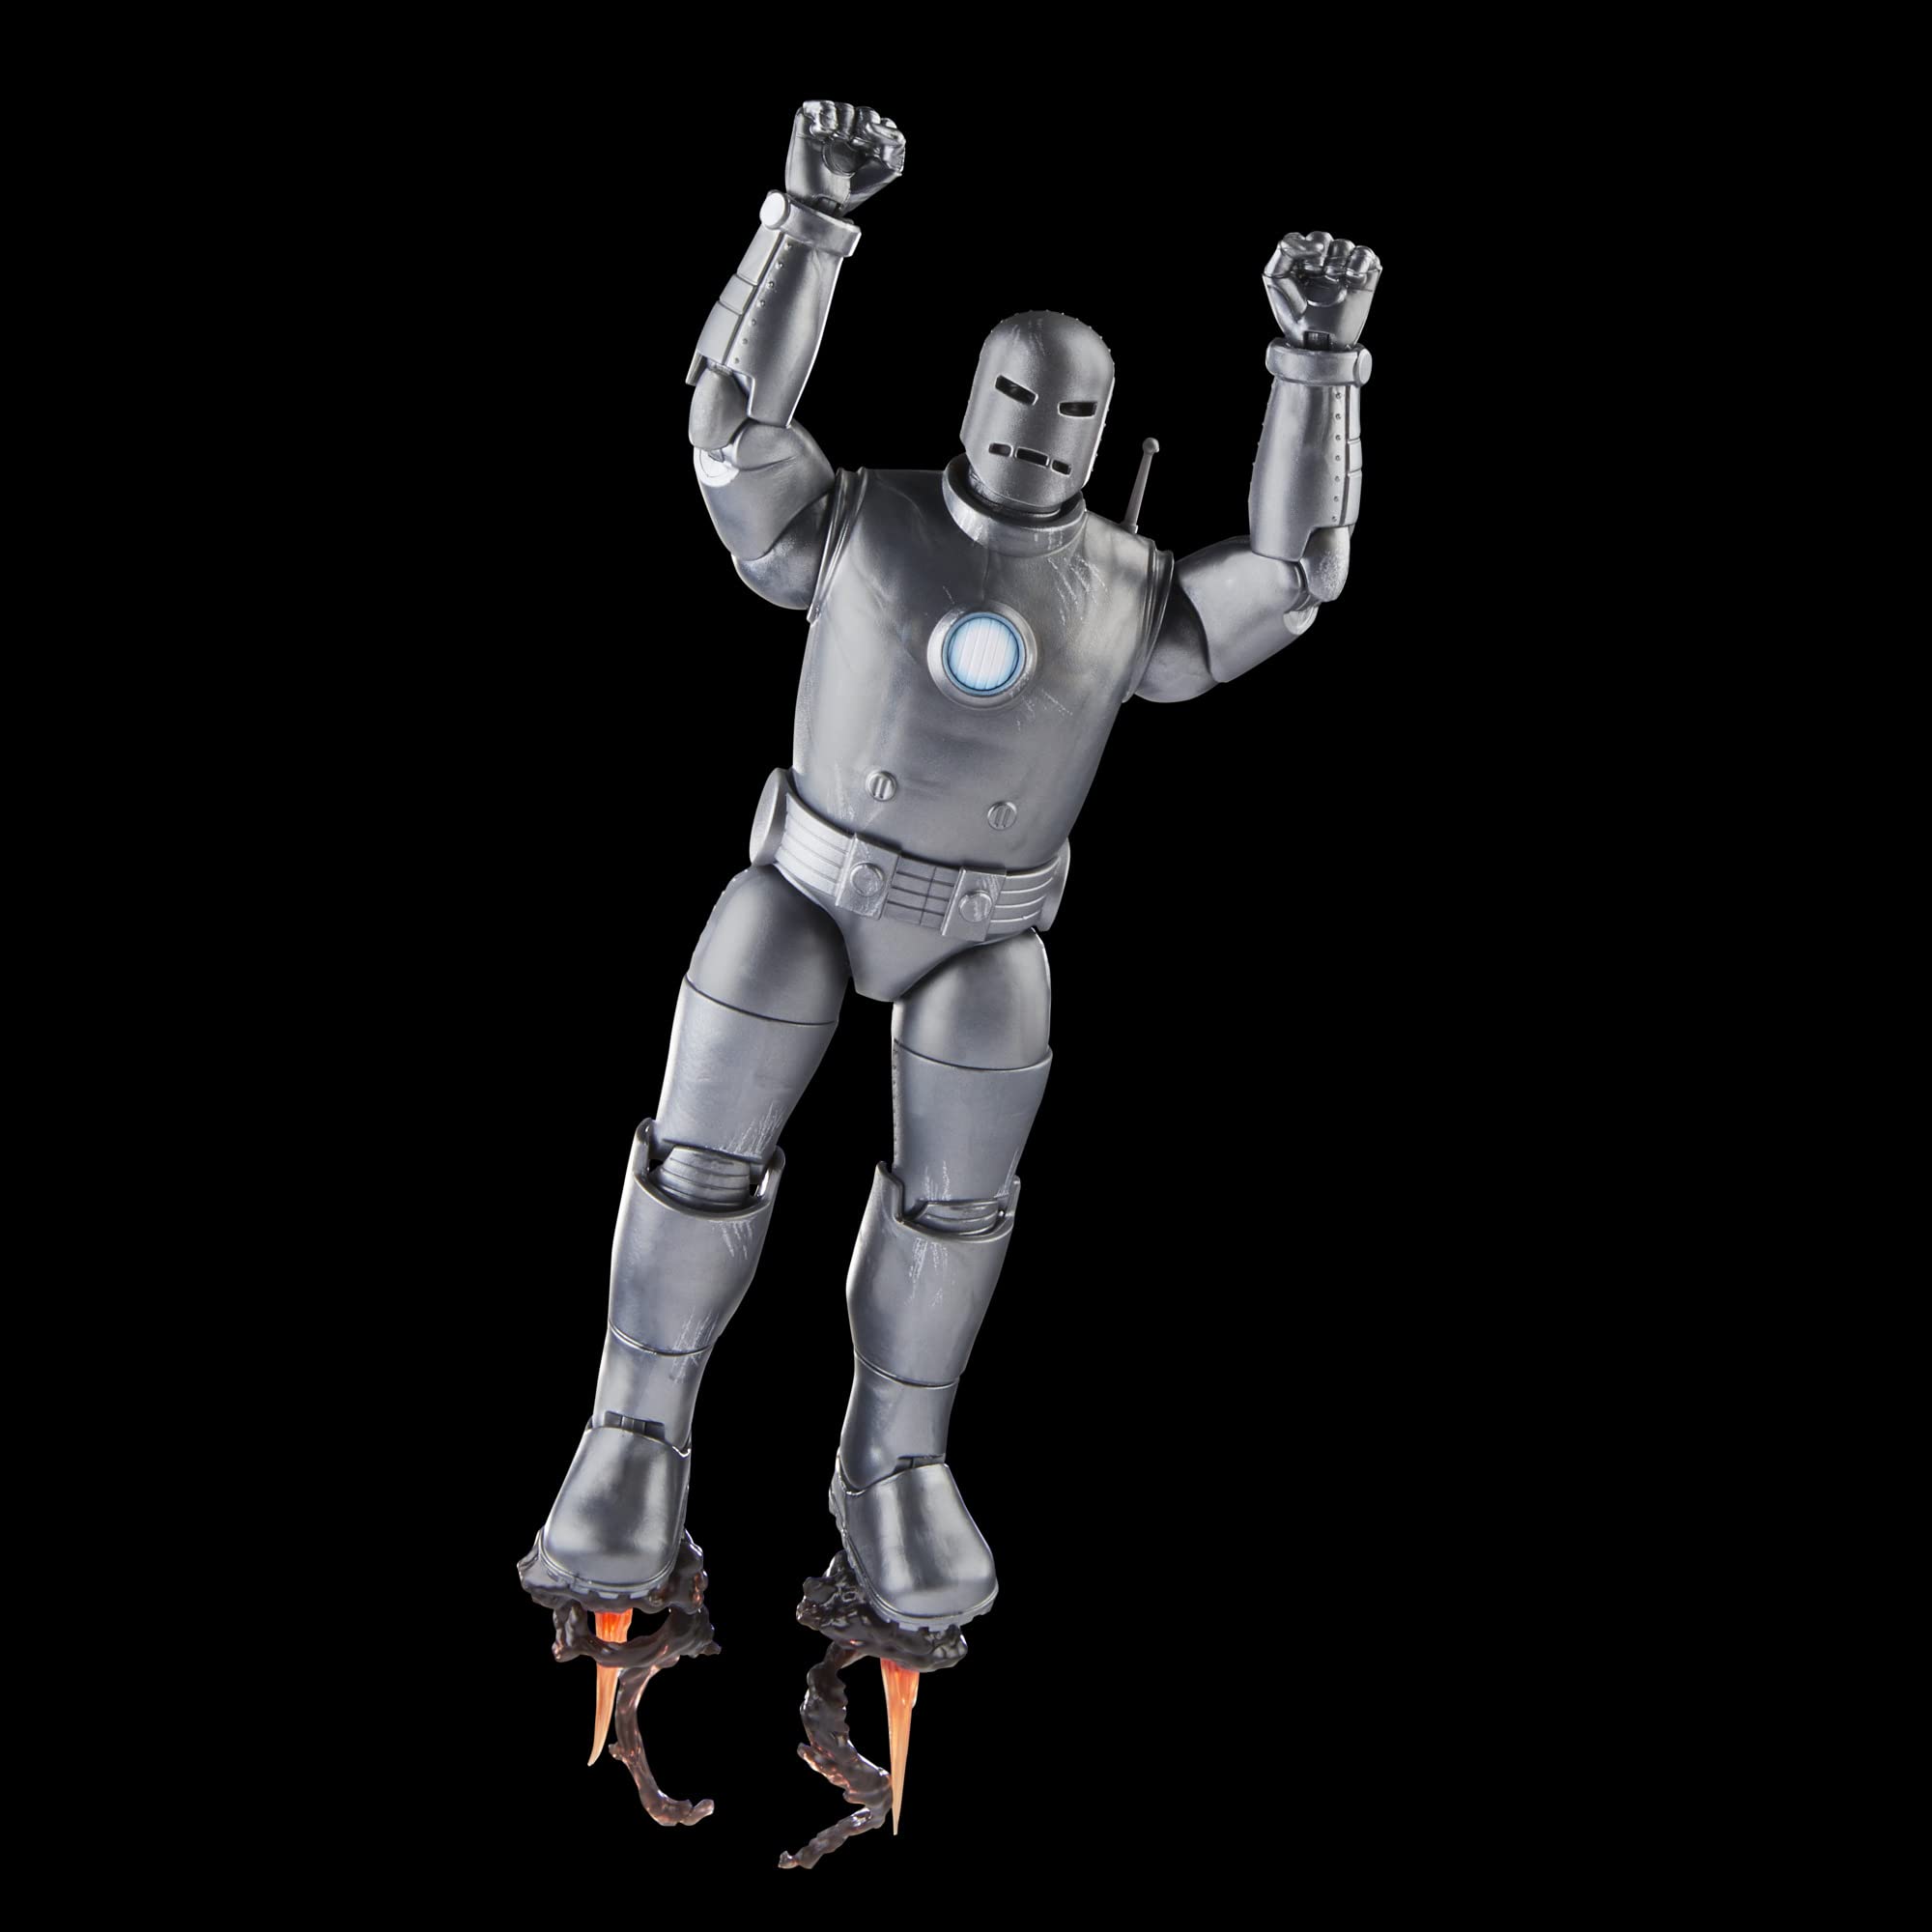 Marvel Hasbro Legends Series Iron Man (Model 01) Avengers 60th Anniversary Collectible 6 Inch Action Figure,6 Accessories